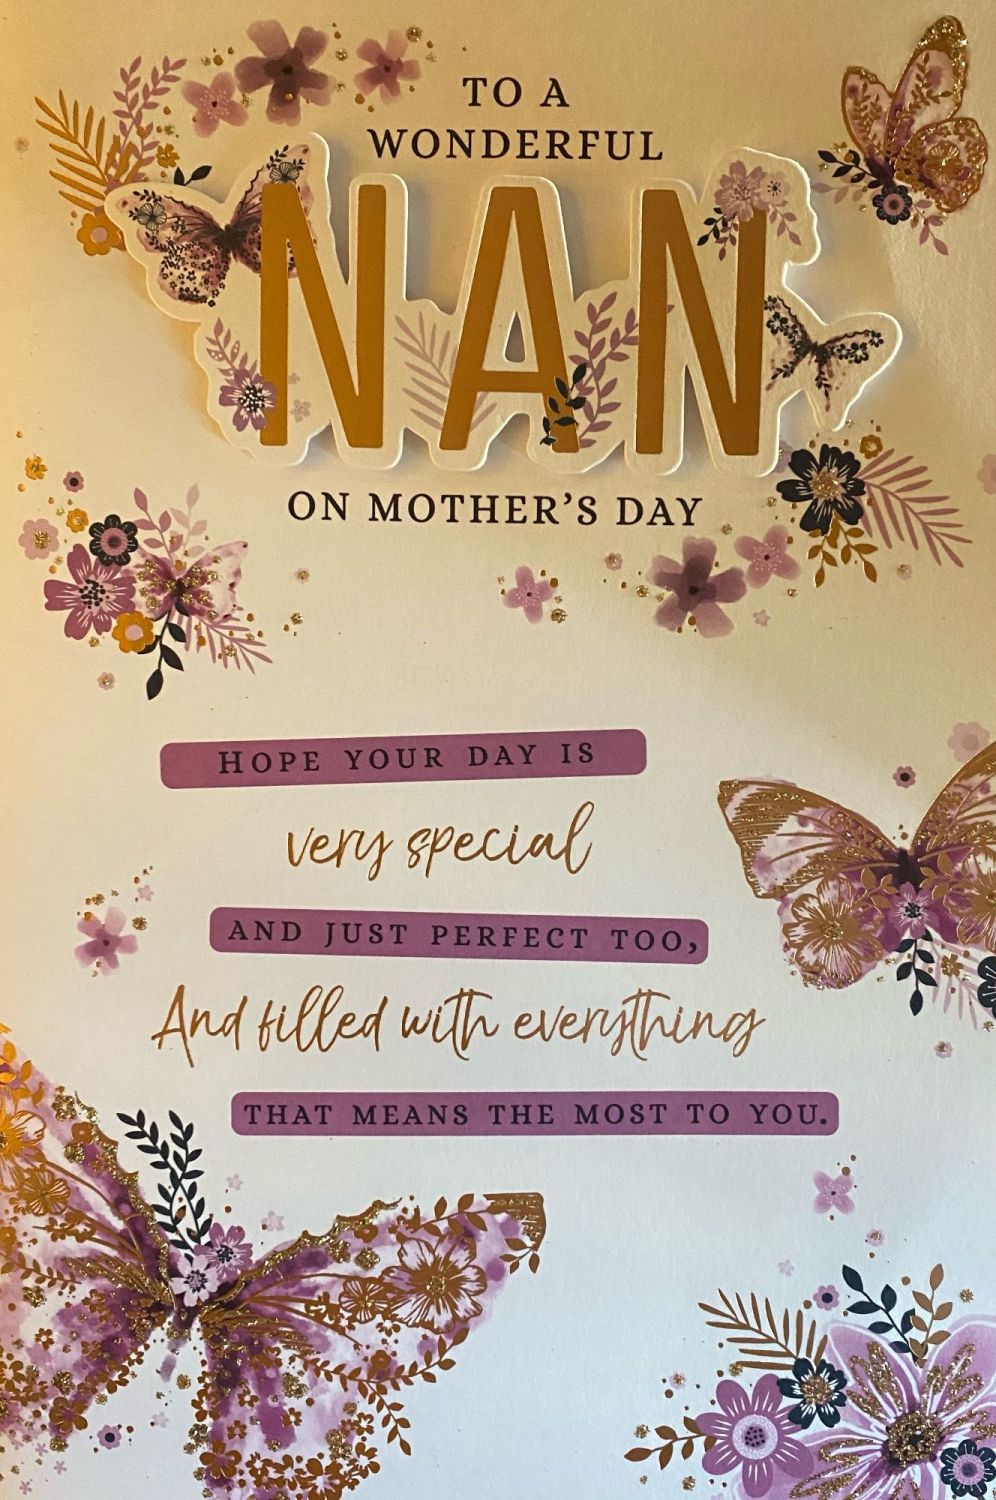 To A Wonderful Nan On Mother's Day - Card